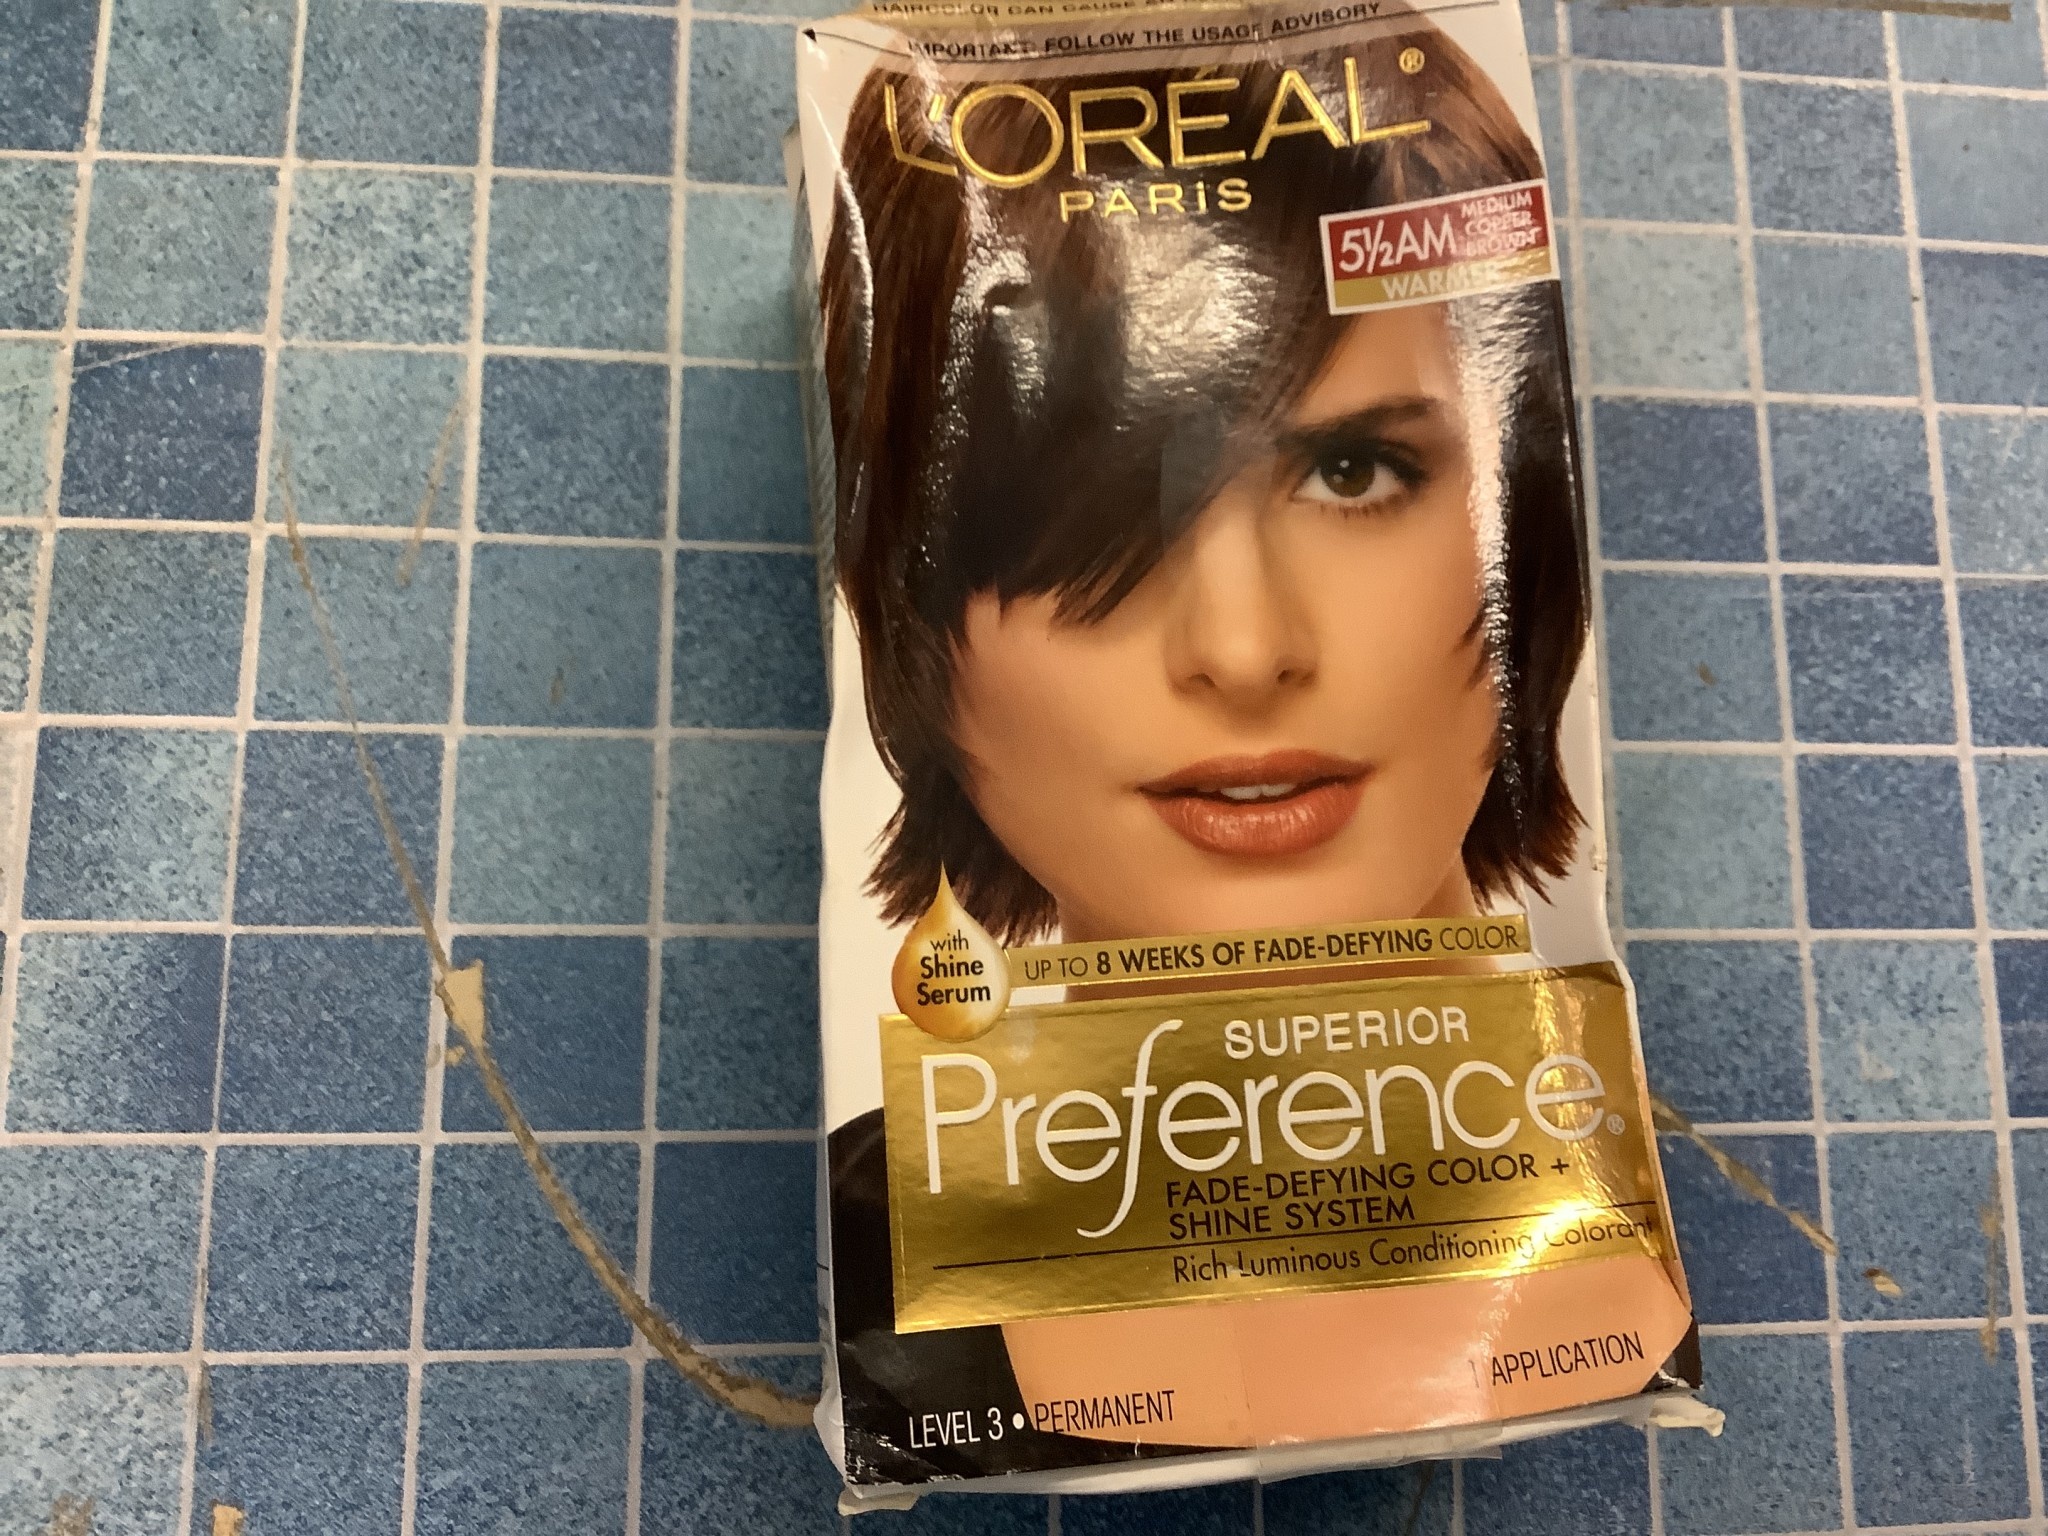 3. L'Oreal Paris Hair Makeup Temporary 1-Day Hair Color for Blondes - wide 6